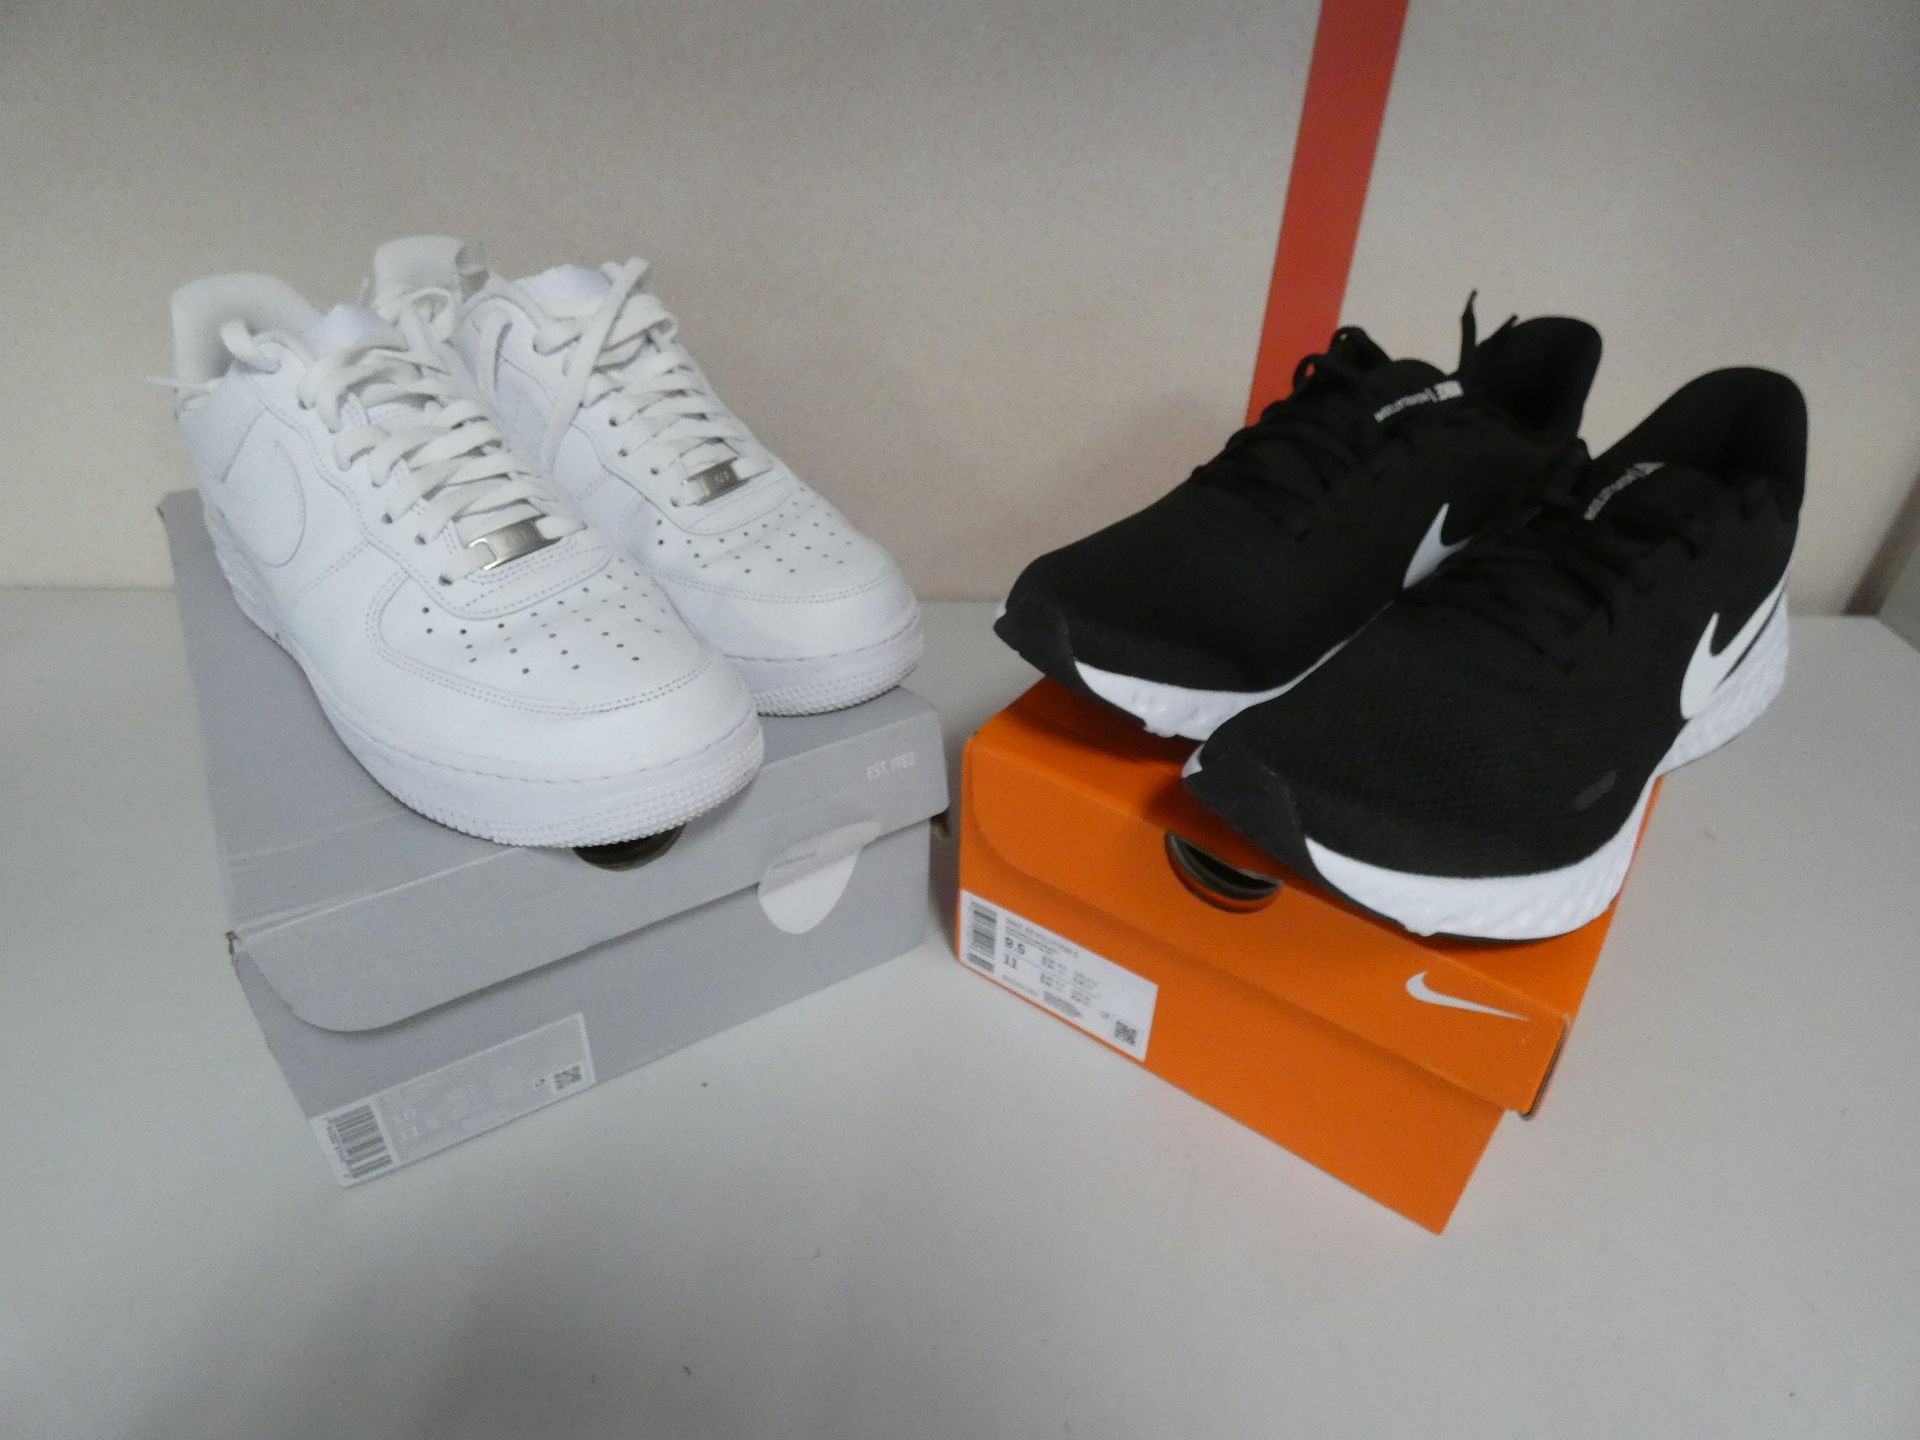 Null A set of two pairs of sneakers in excellent condition

Depot location: MAGA&hellip;